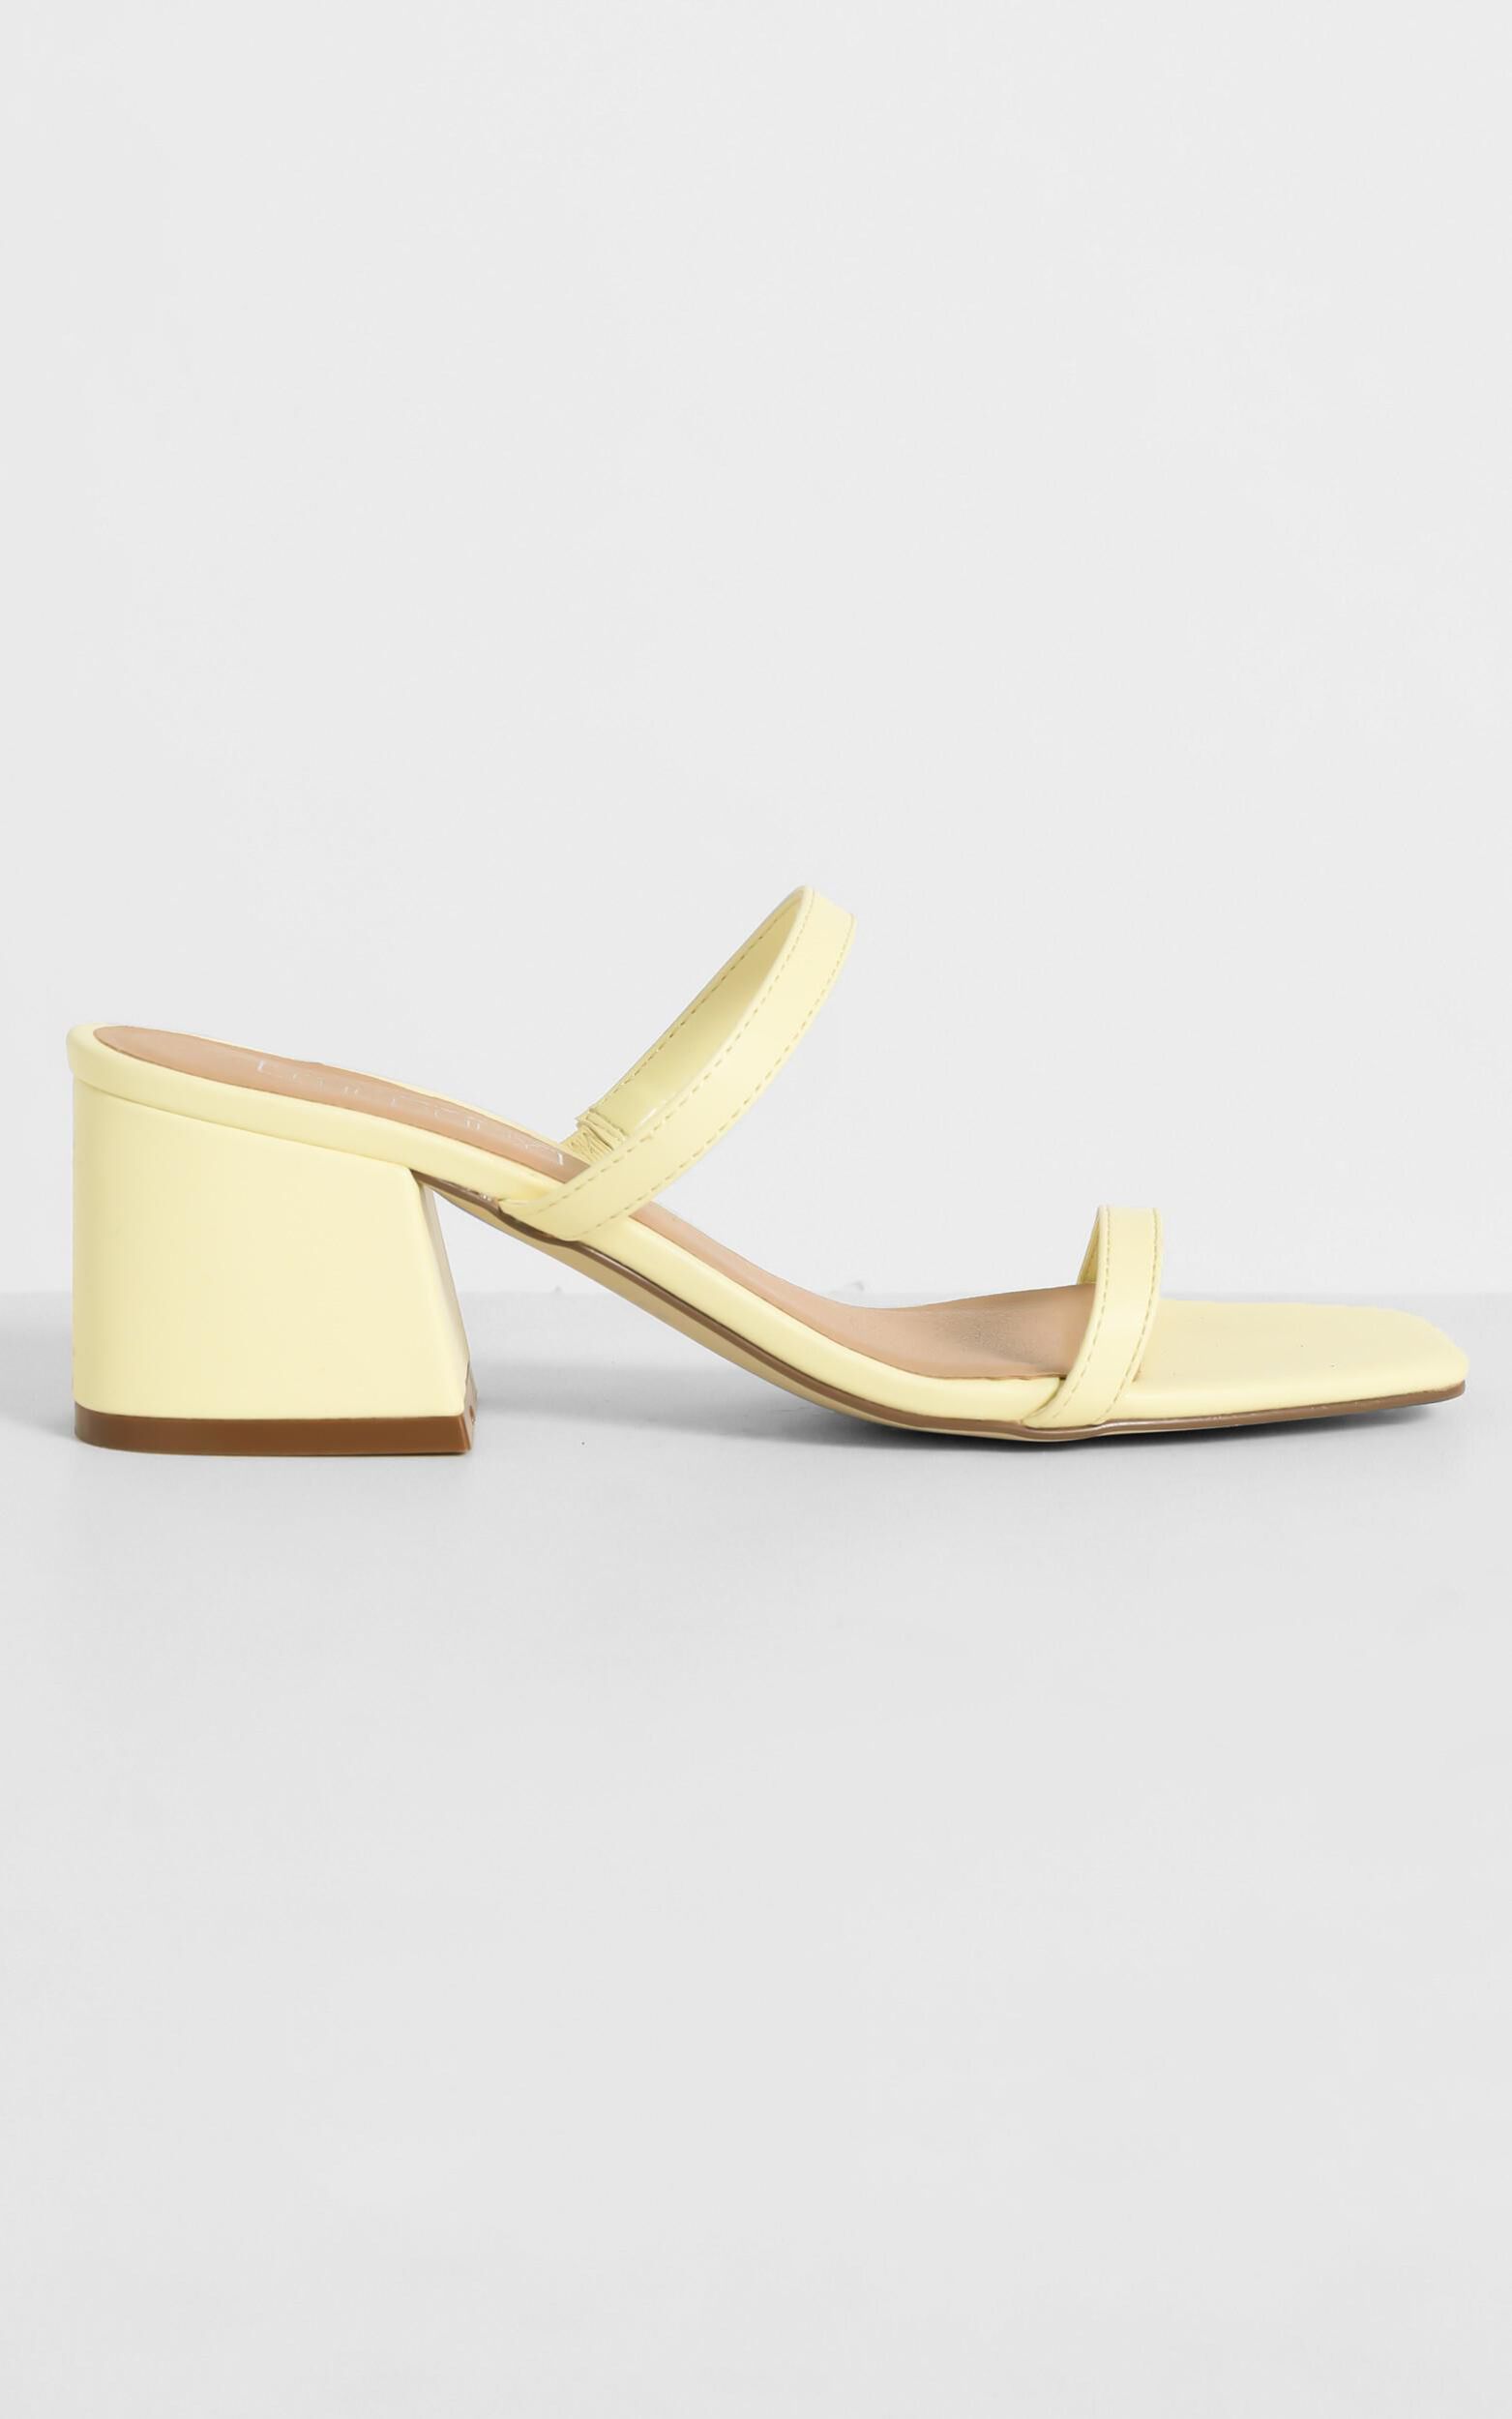 Therapy - Goldie Heels in Pastel Yellow - 5, YEL4